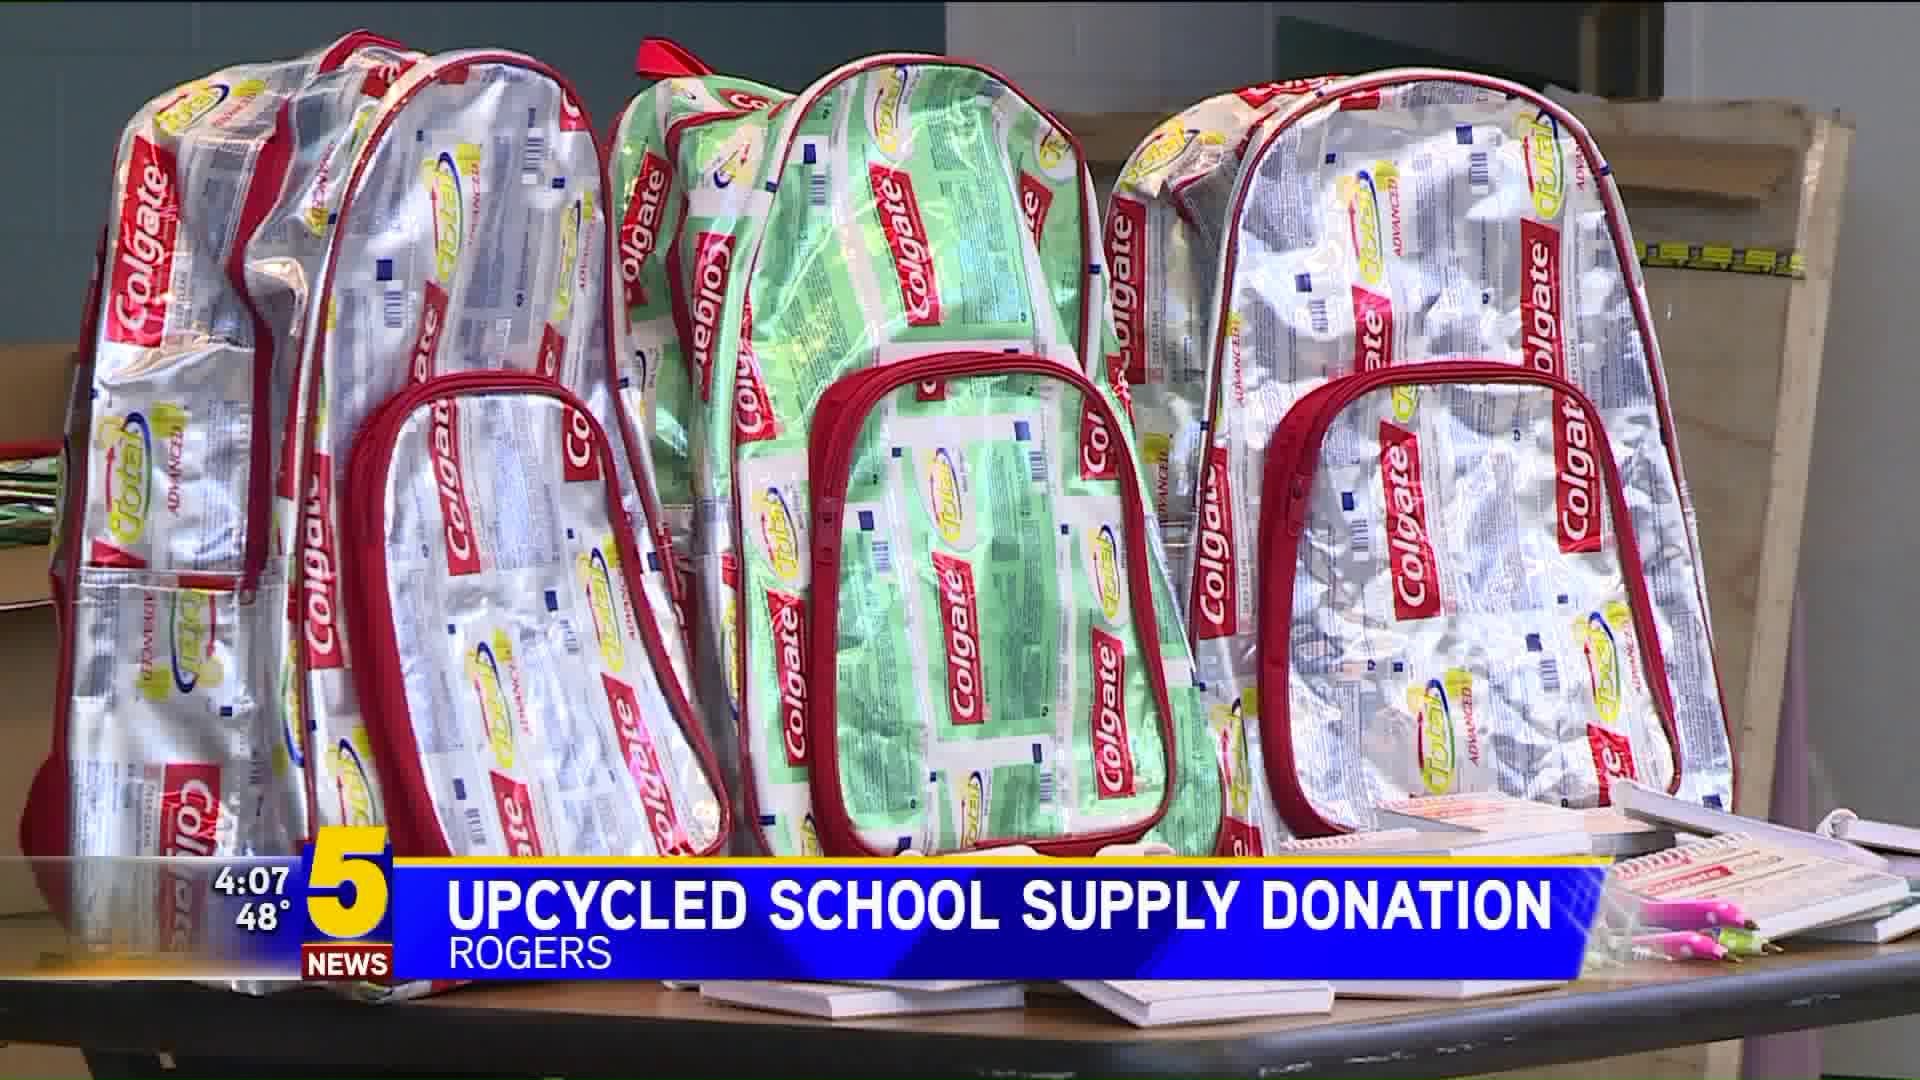 Upcycled School Supply Donation In Rogers